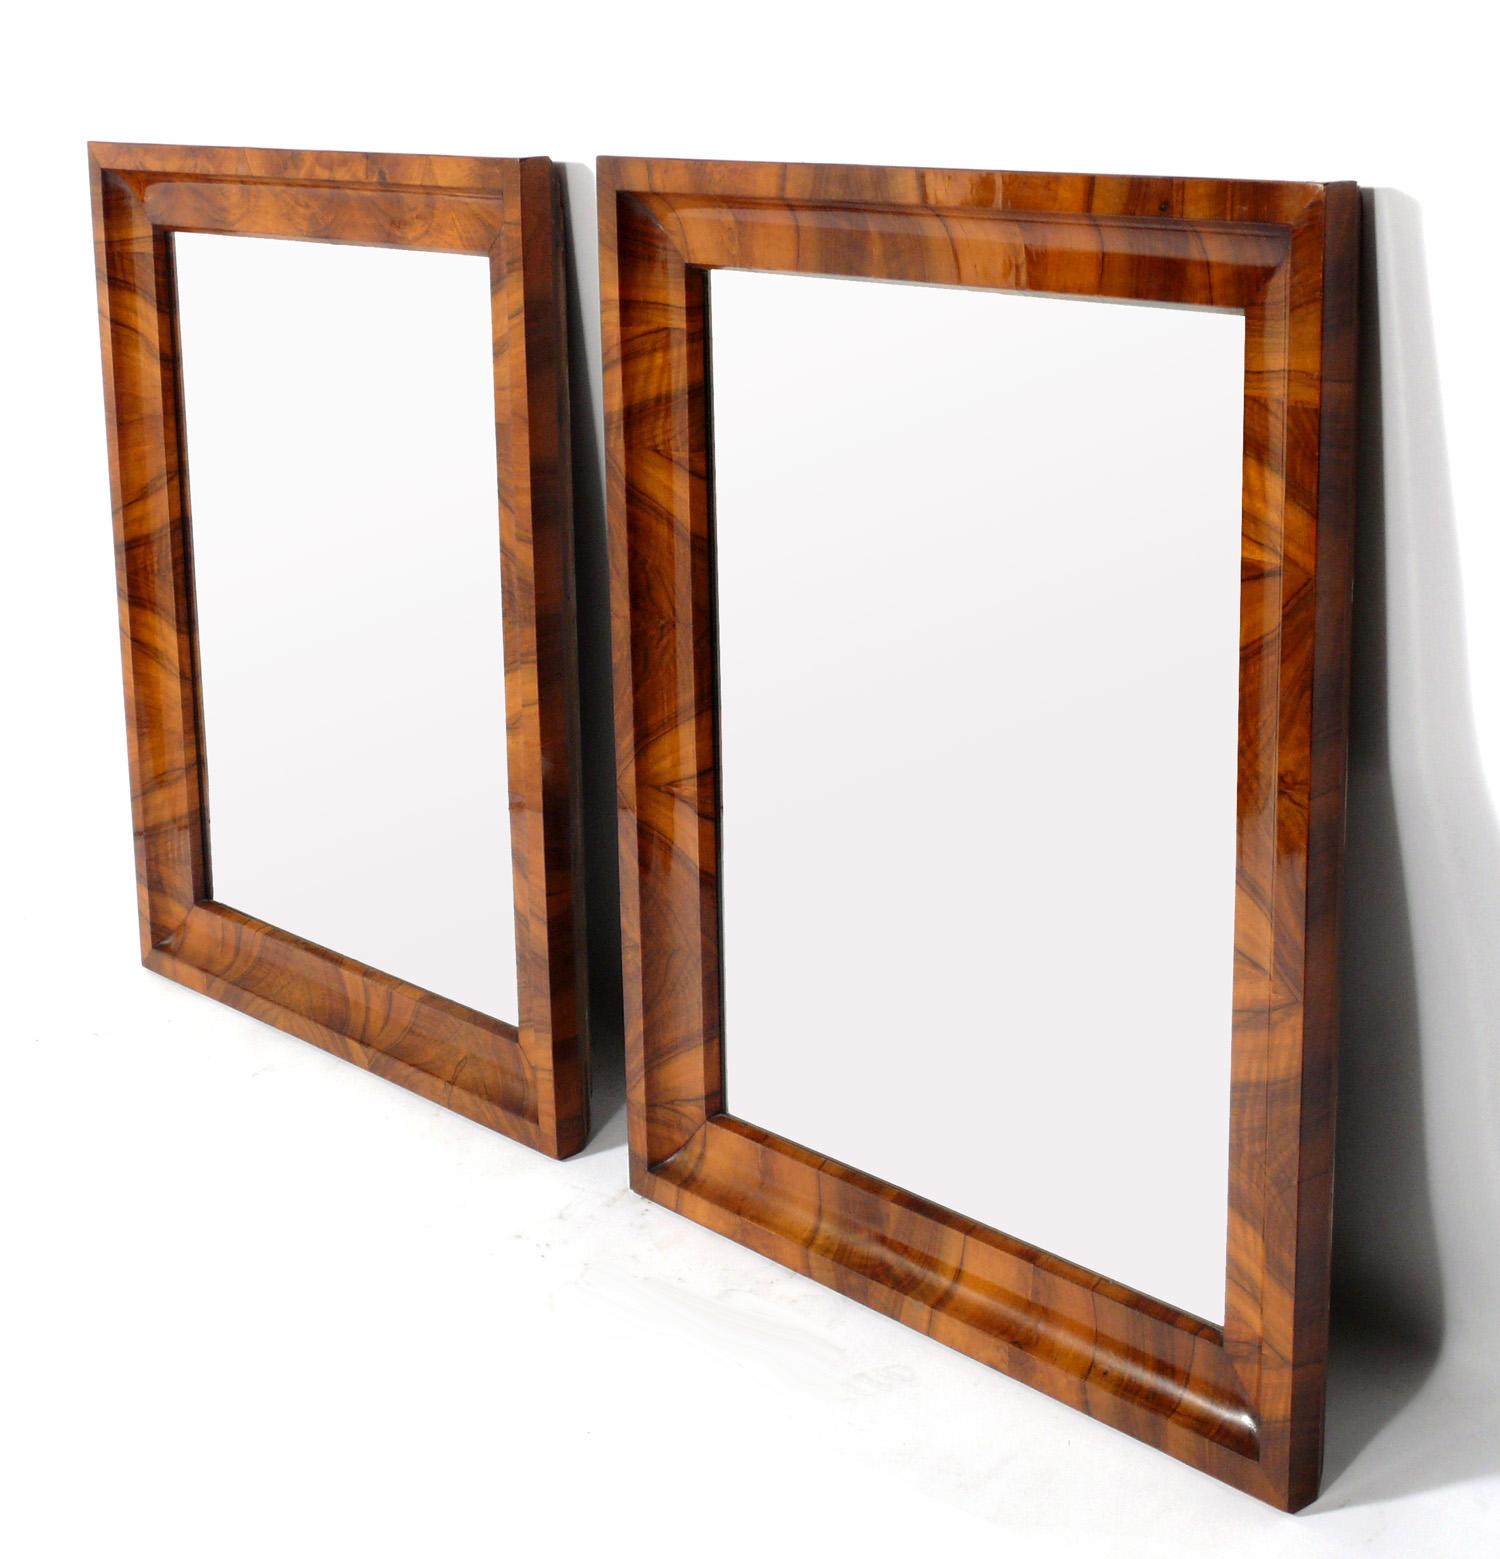 19th century Biedermeier mirrors, Germany, circa 19th century. These are extremely well made with beautifully grained bookmatched walnut frames. They are priced at $2800 each or $5000 for the pair. They each measure an impressive: 36